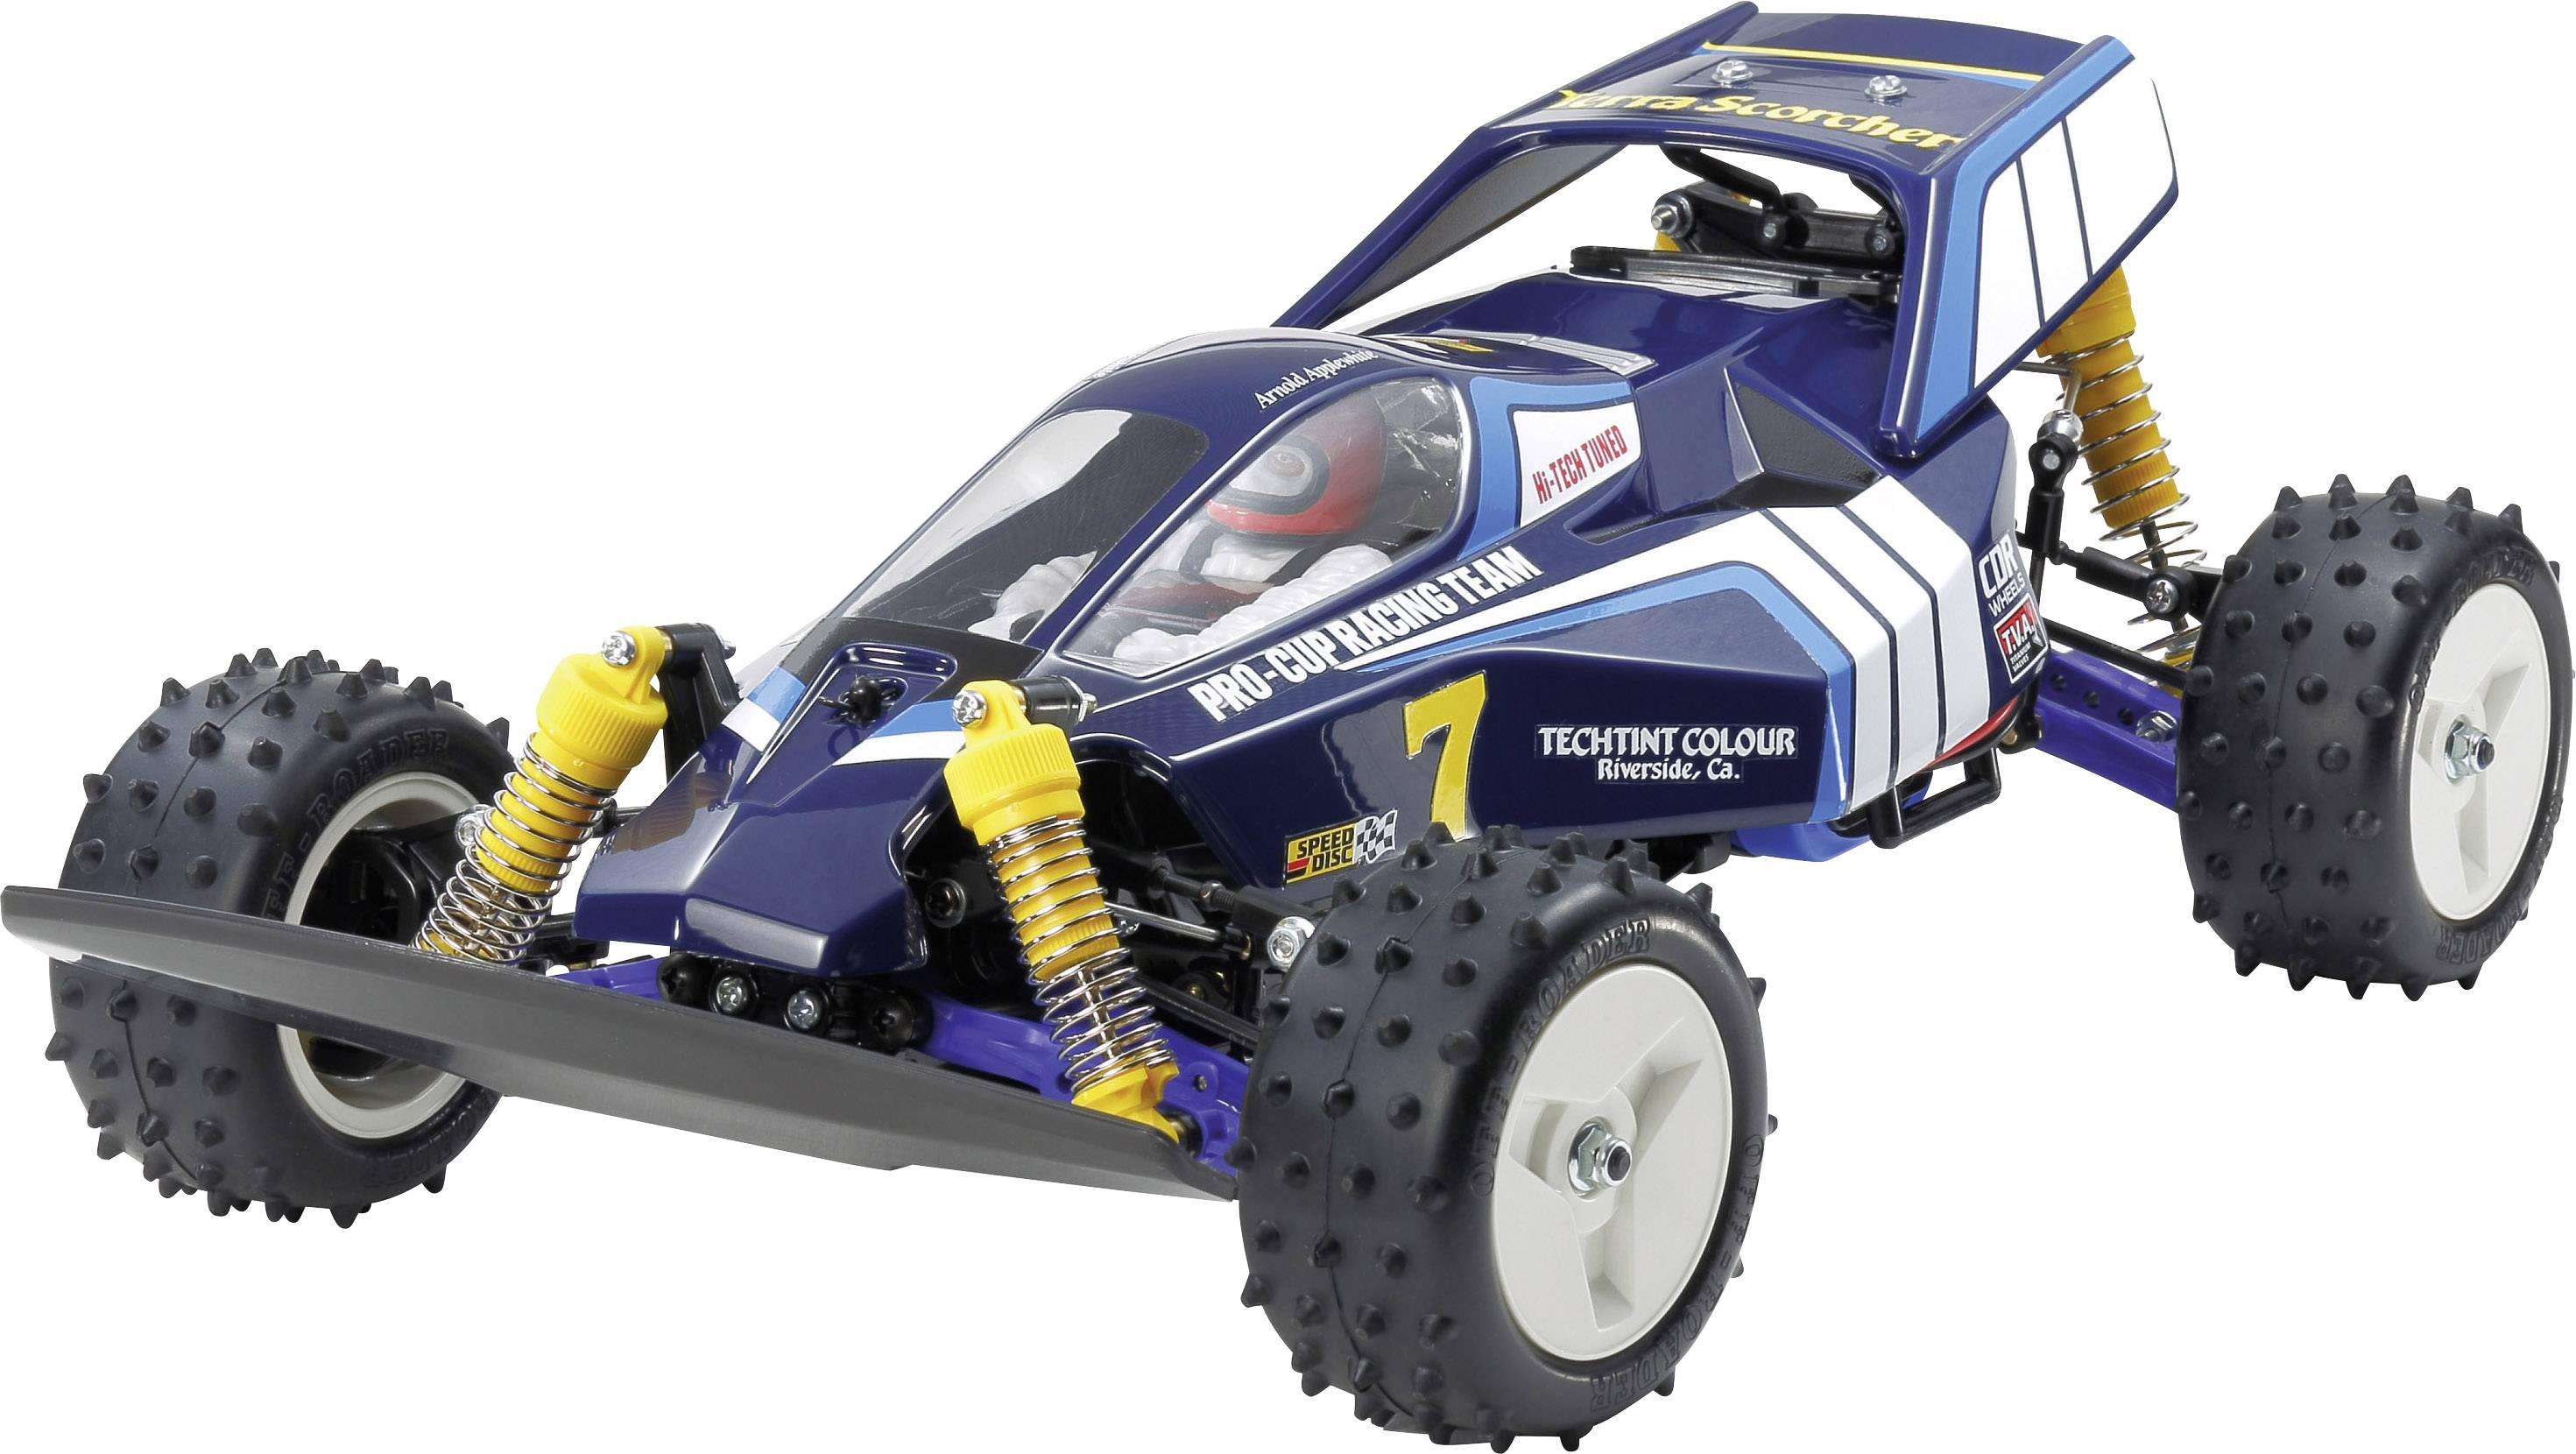  Tamiya  Terra Scorcher 2022 brushed 1 10 Auto RC  lectrique 